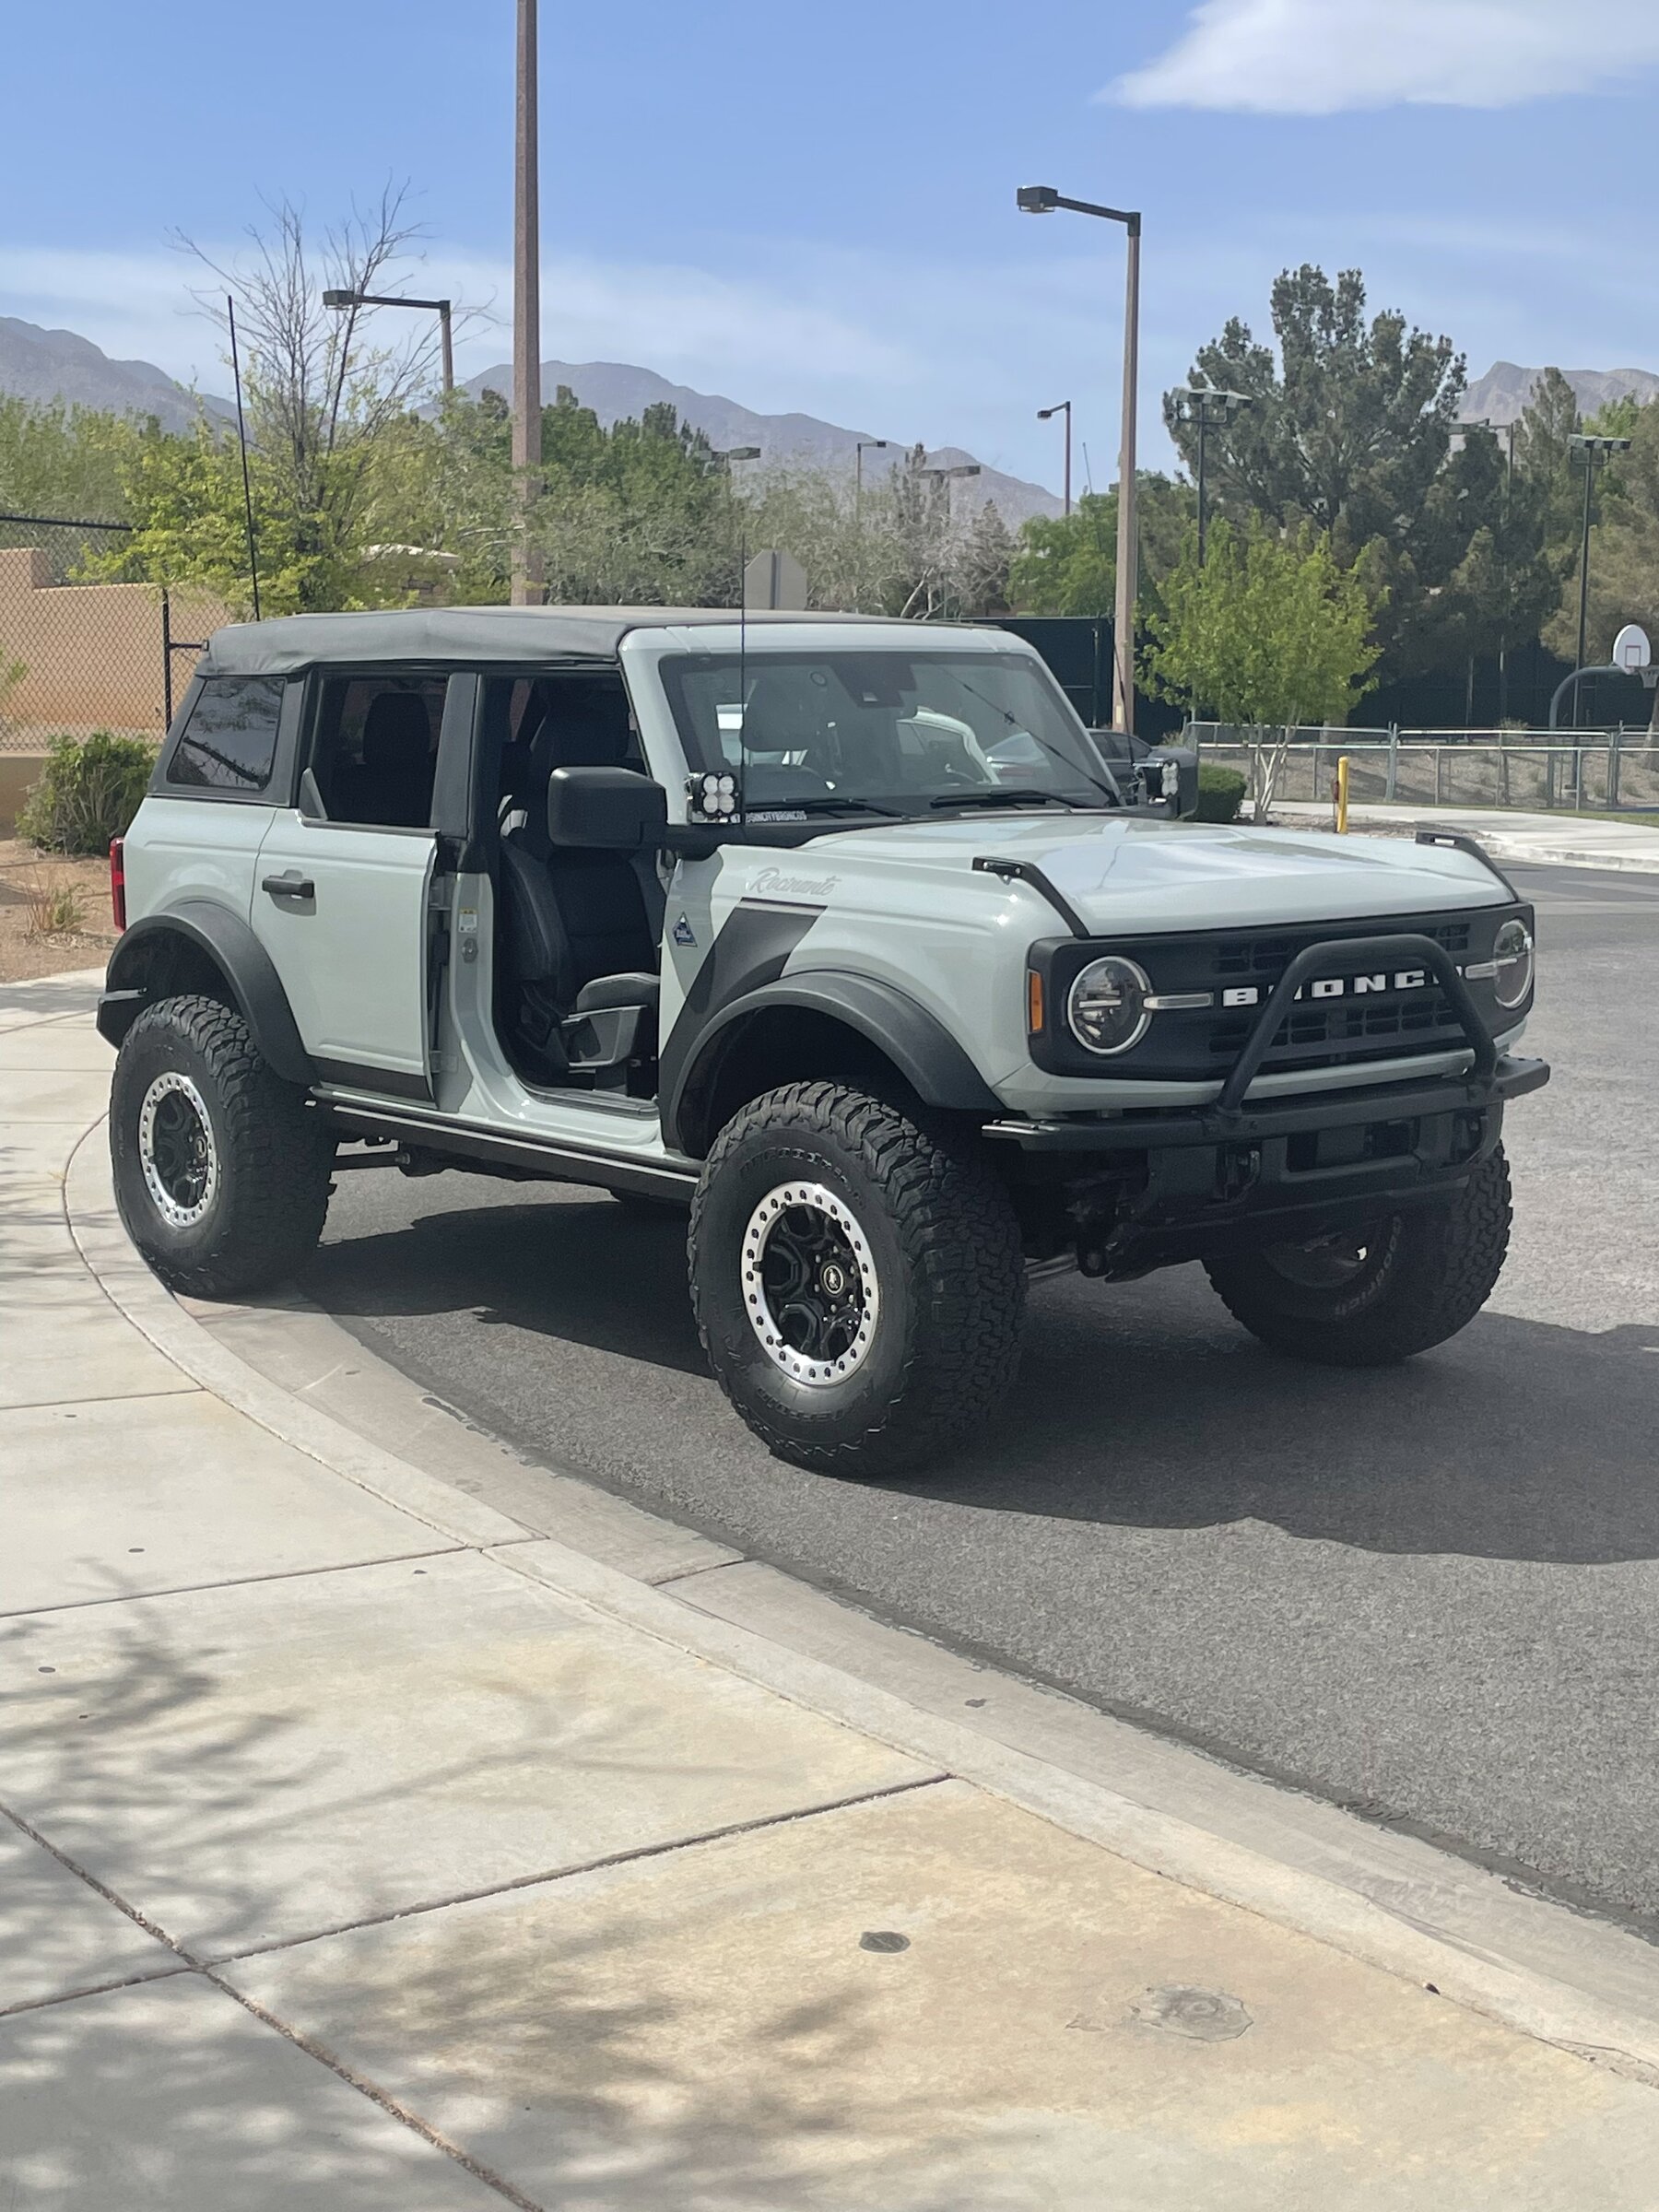 Ford Bronco Let’s see your doors off pics… 20220606_183249